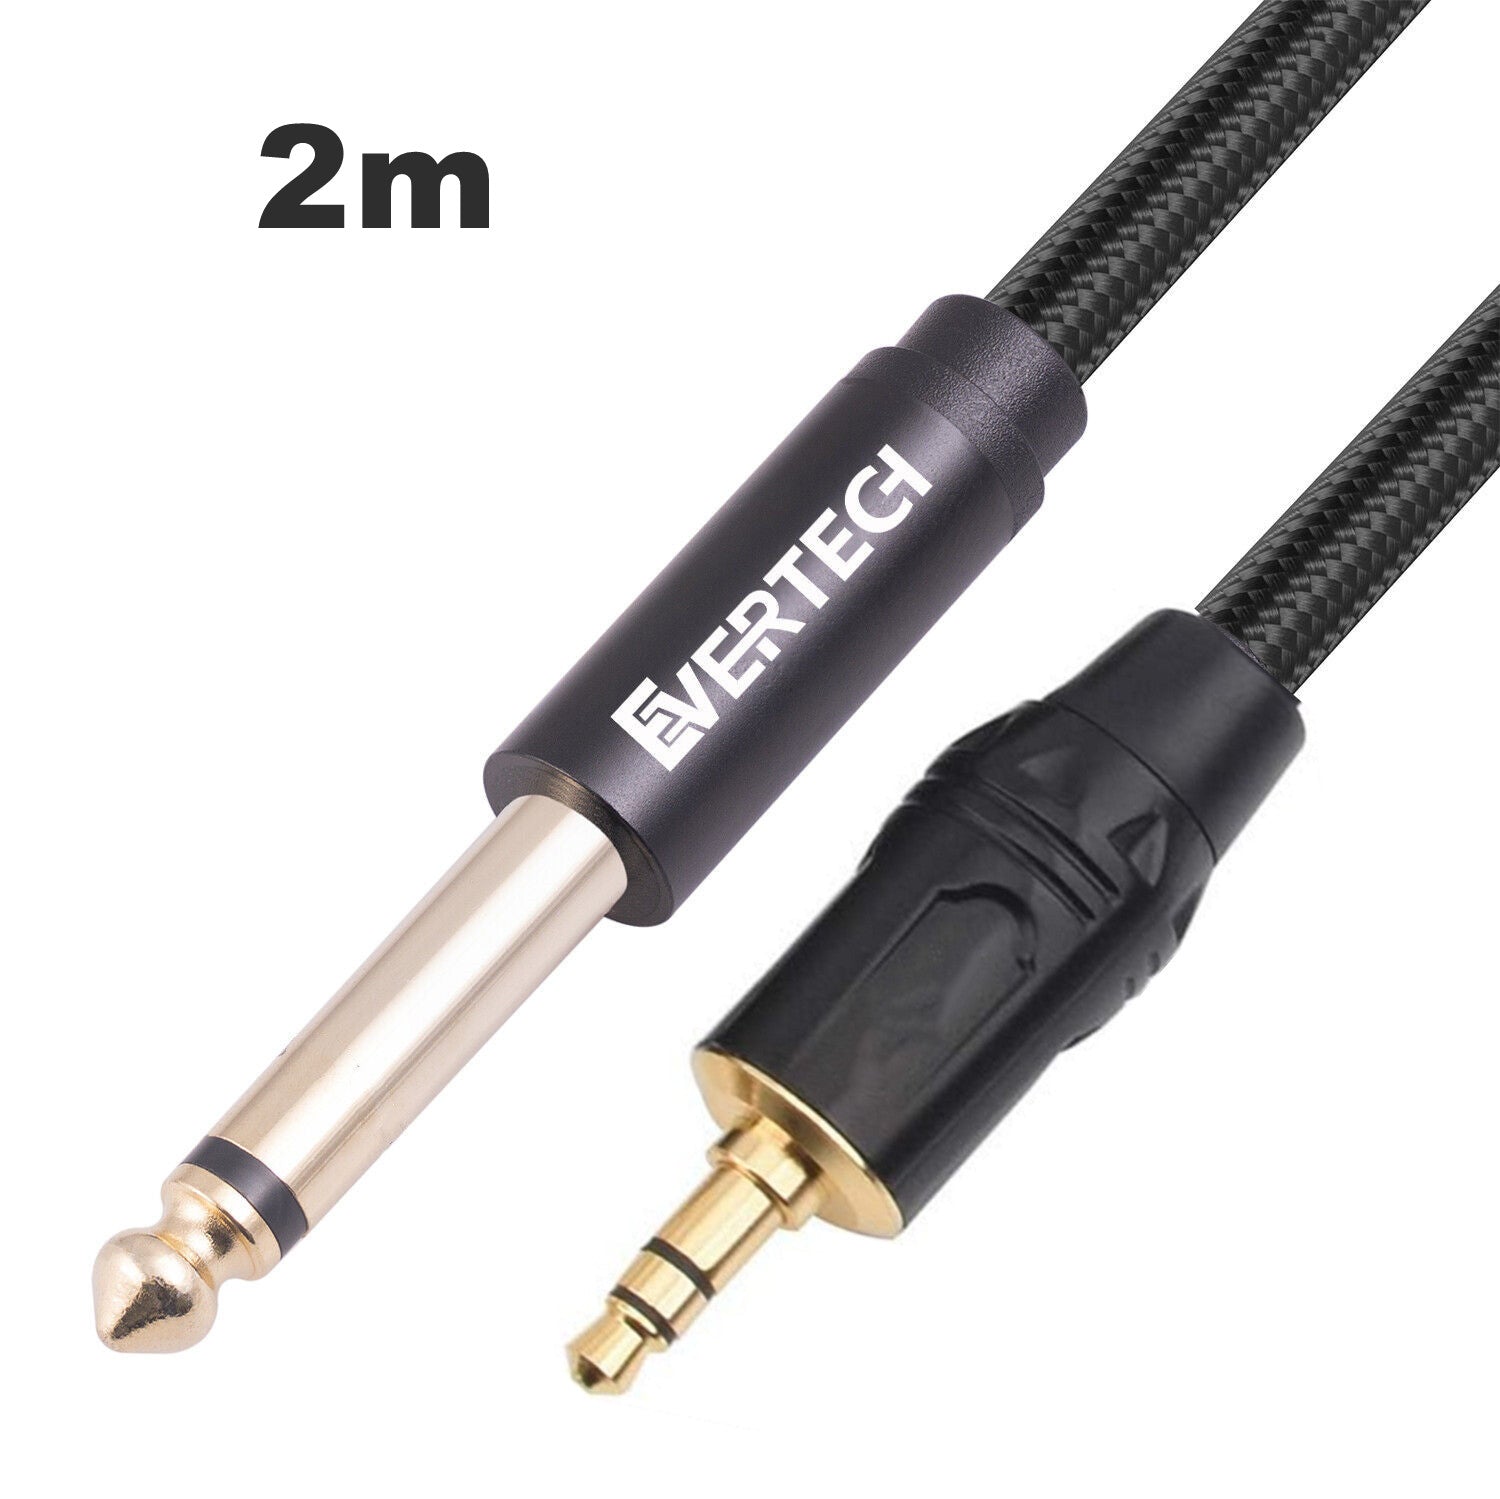 3.5mm Stereo to 6.35mm Mono 1/4 inch Amplifier Guitar Fabric Cable Audio Lead